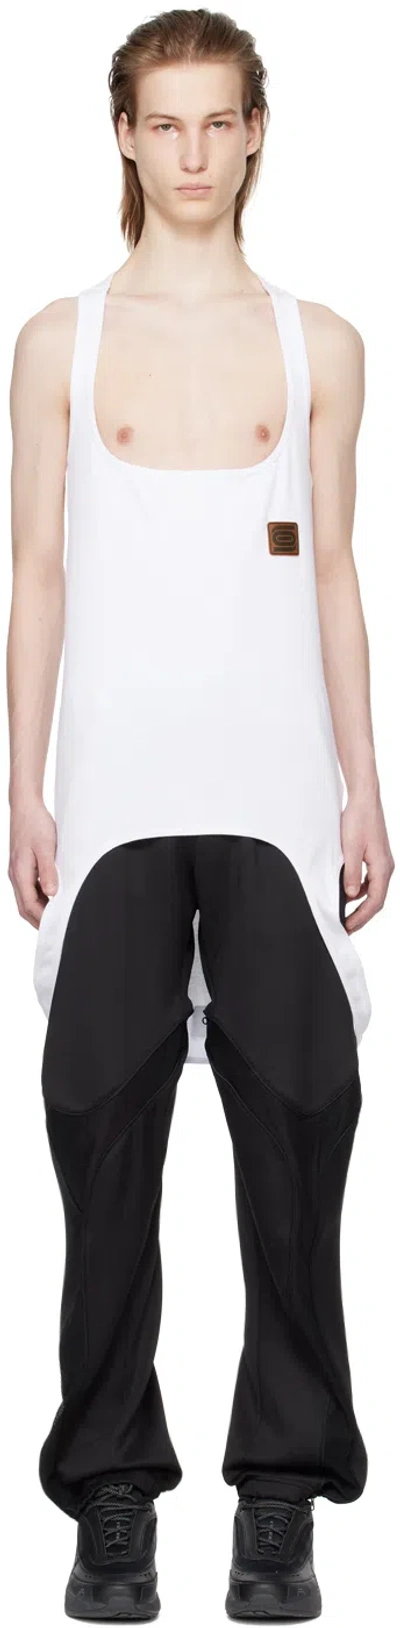 Olly Shinder White Upside Down Tank Top